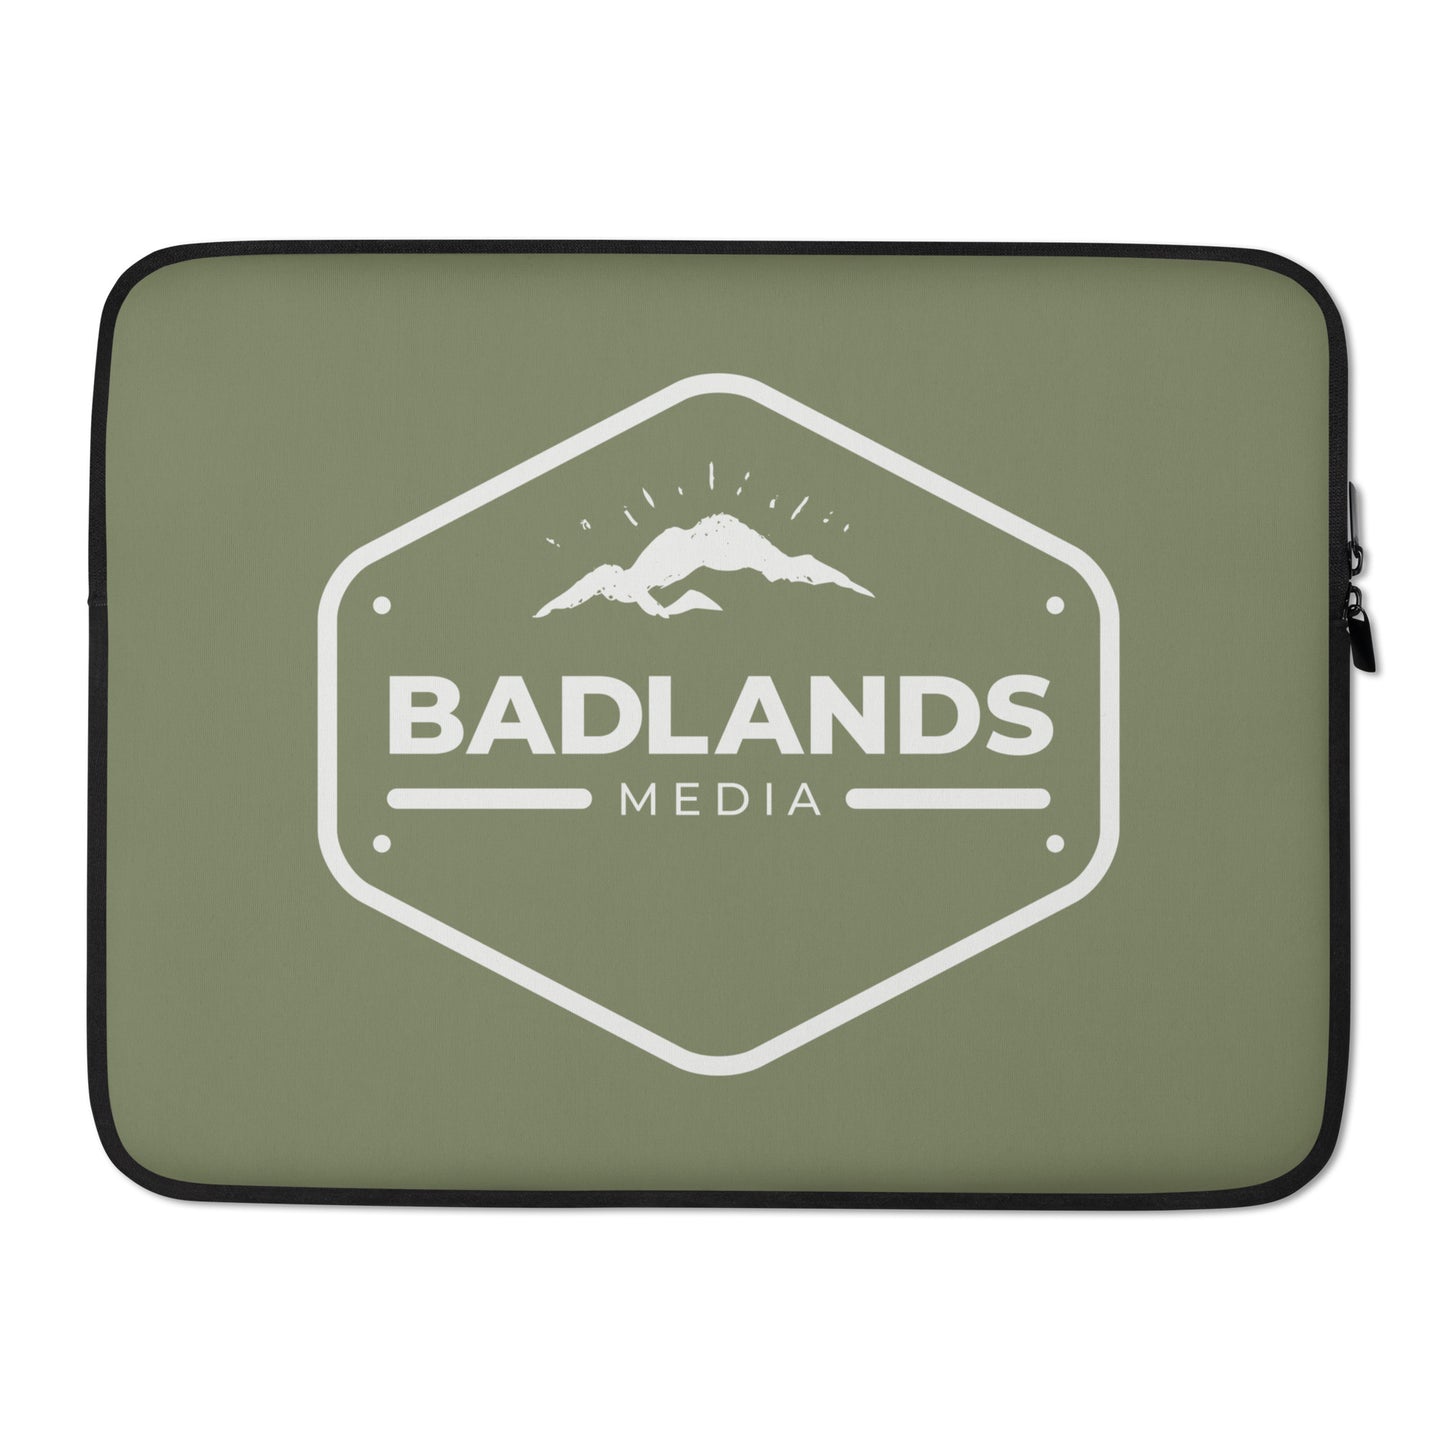 Badlands Laptop Sleeve in army green